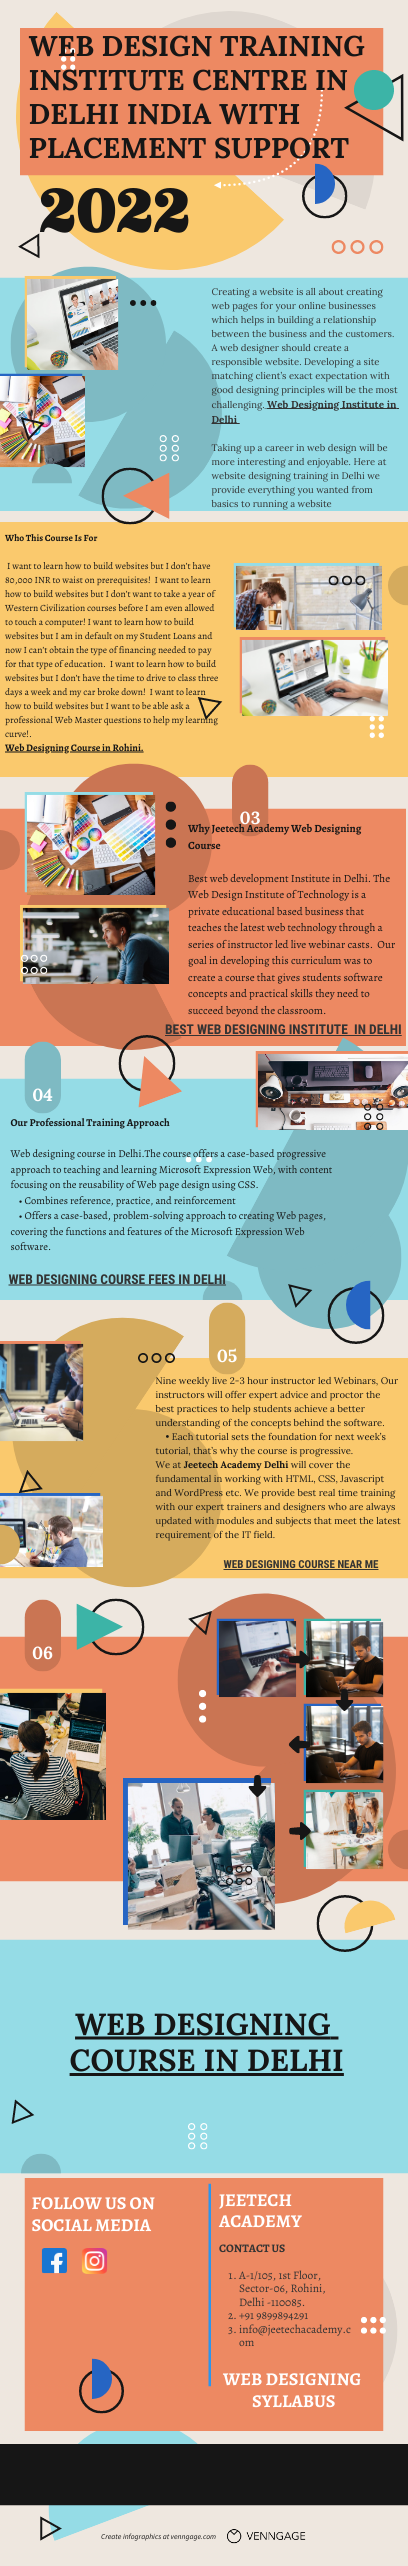 Web Design Training Institute Center In Delhi India With Placement Support - by Riya Malik [Infographic]